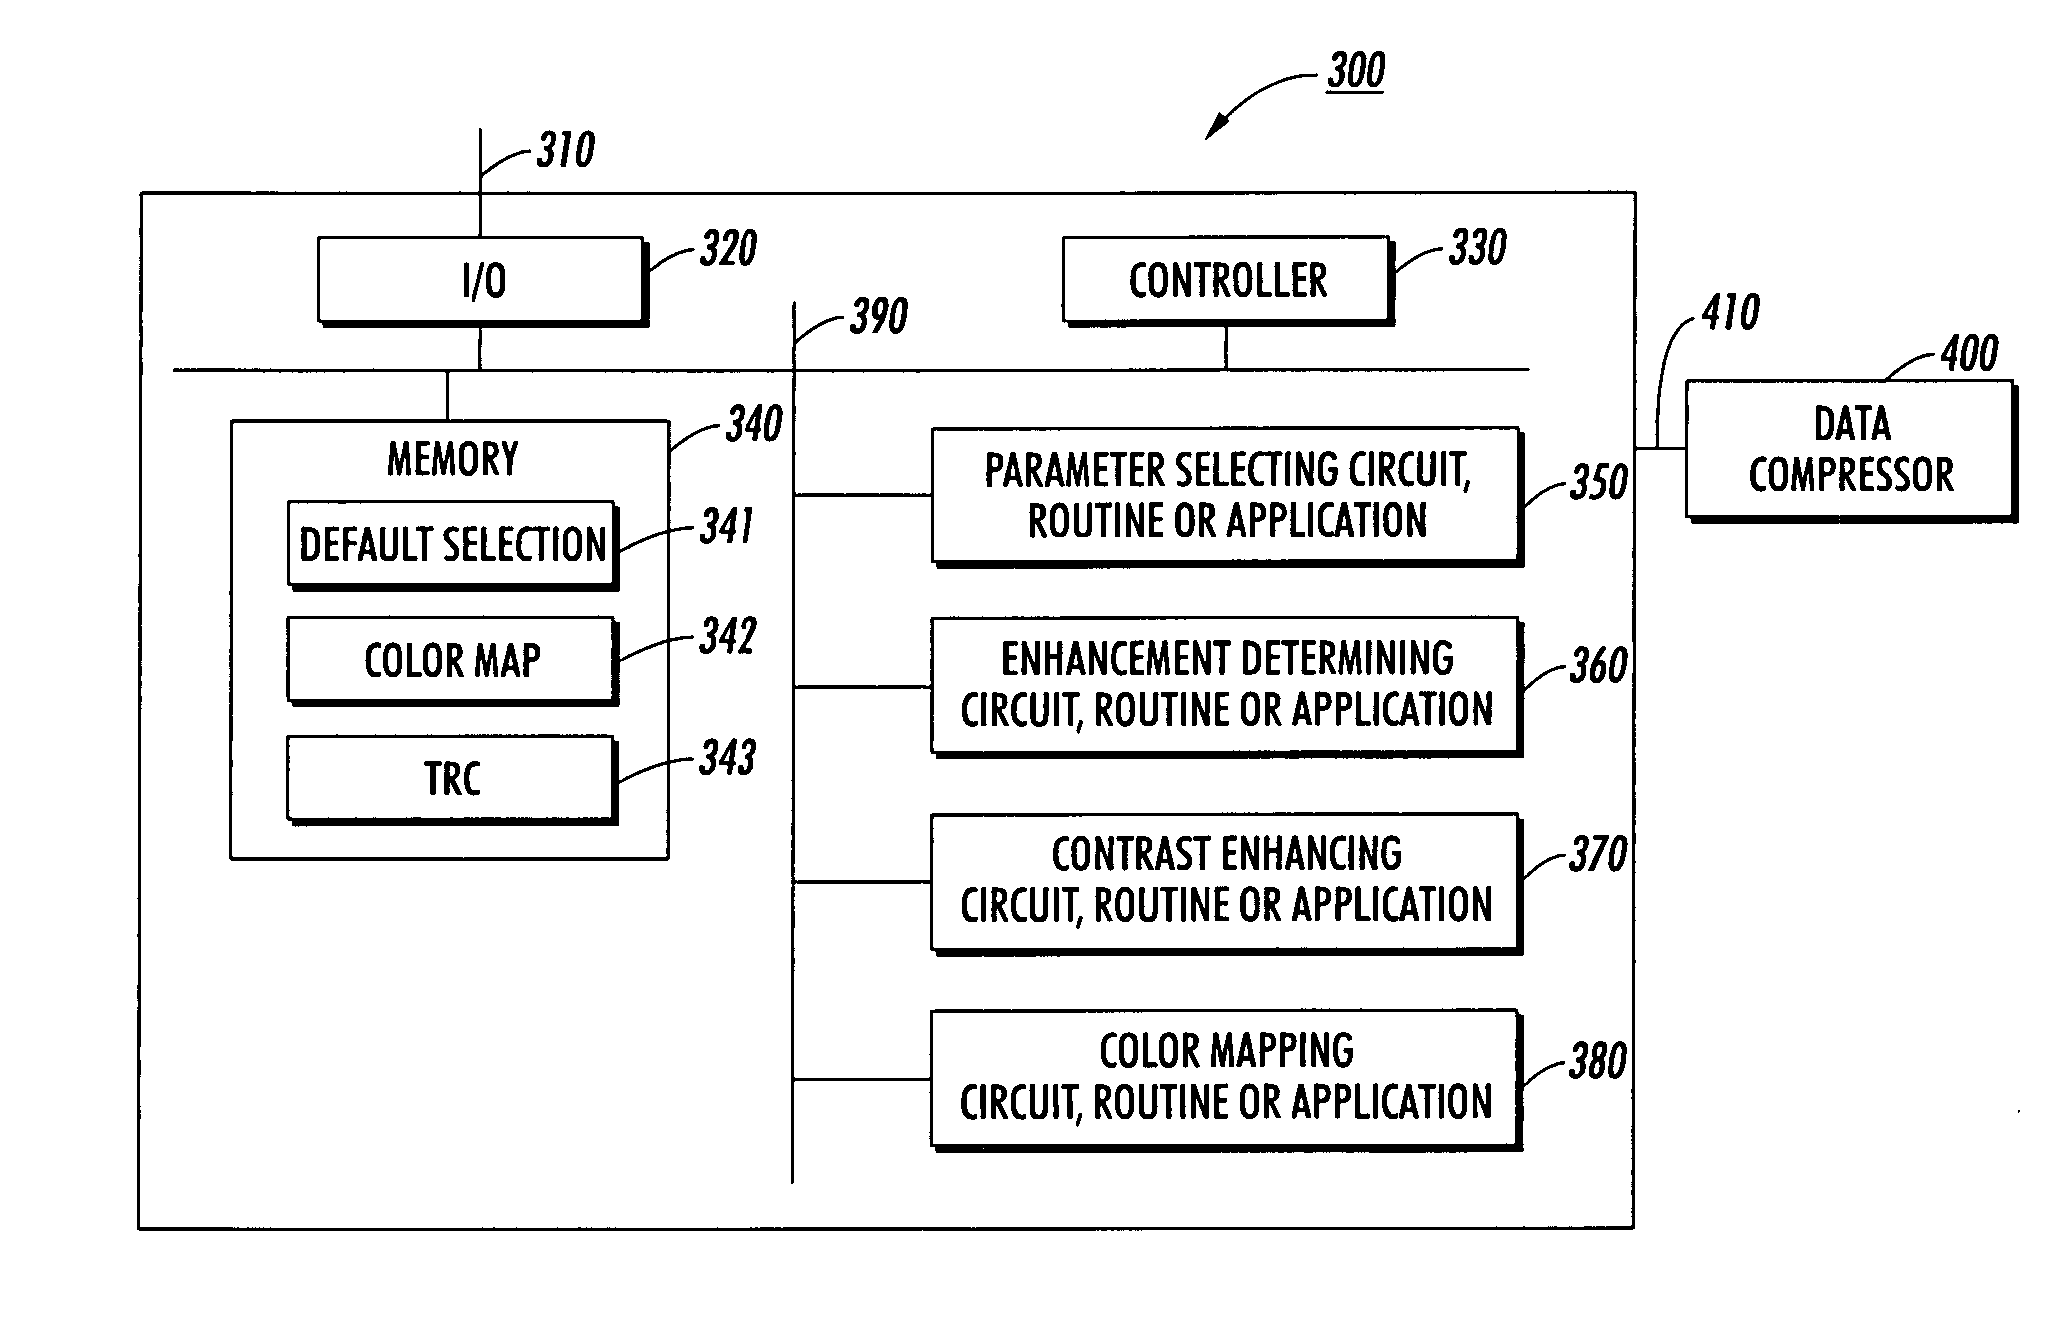 Systems and methods for processing image data prior to compression